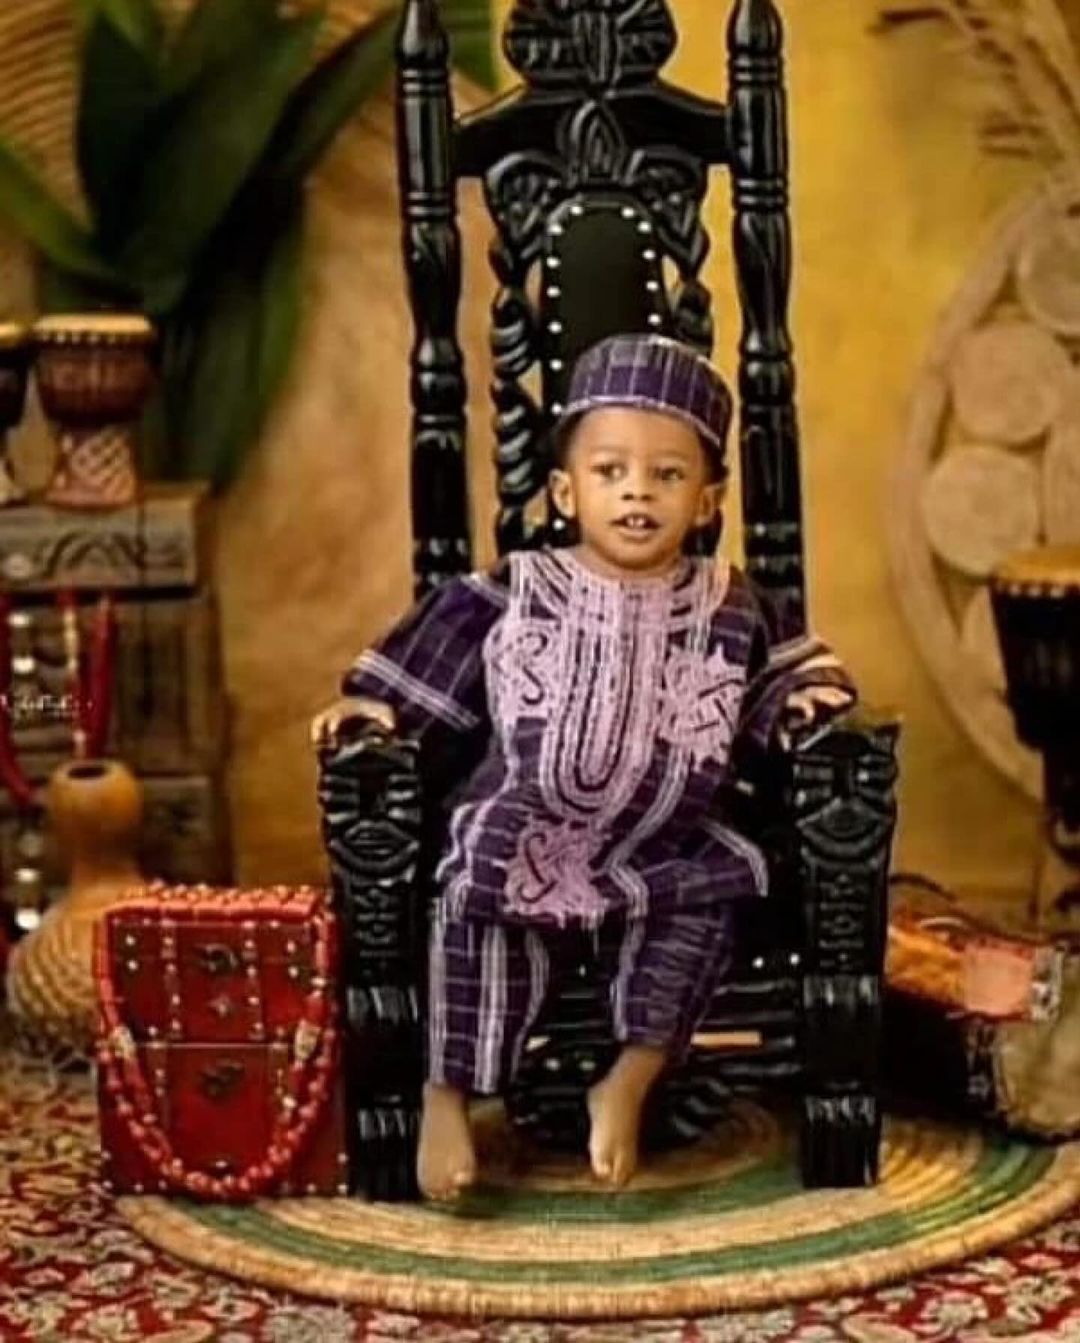 Late Mohbad's Son Liam celebrates first birthday with adorable photos